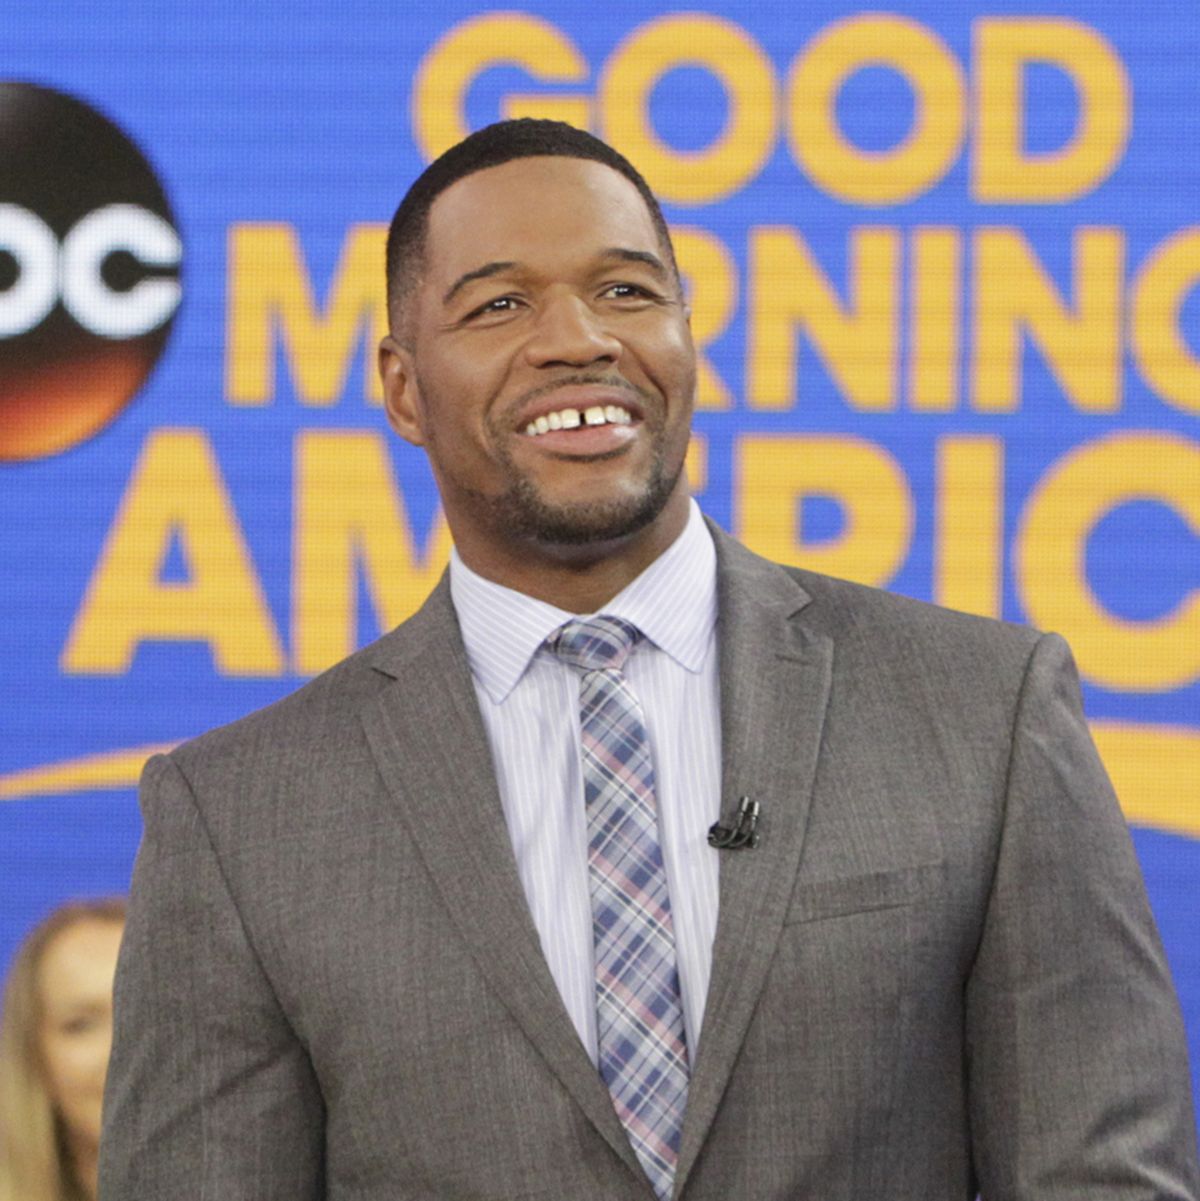 Where is Michael Strahan on 'GMA'? - Is Michael Strahan Still on 'Good Morning America'?